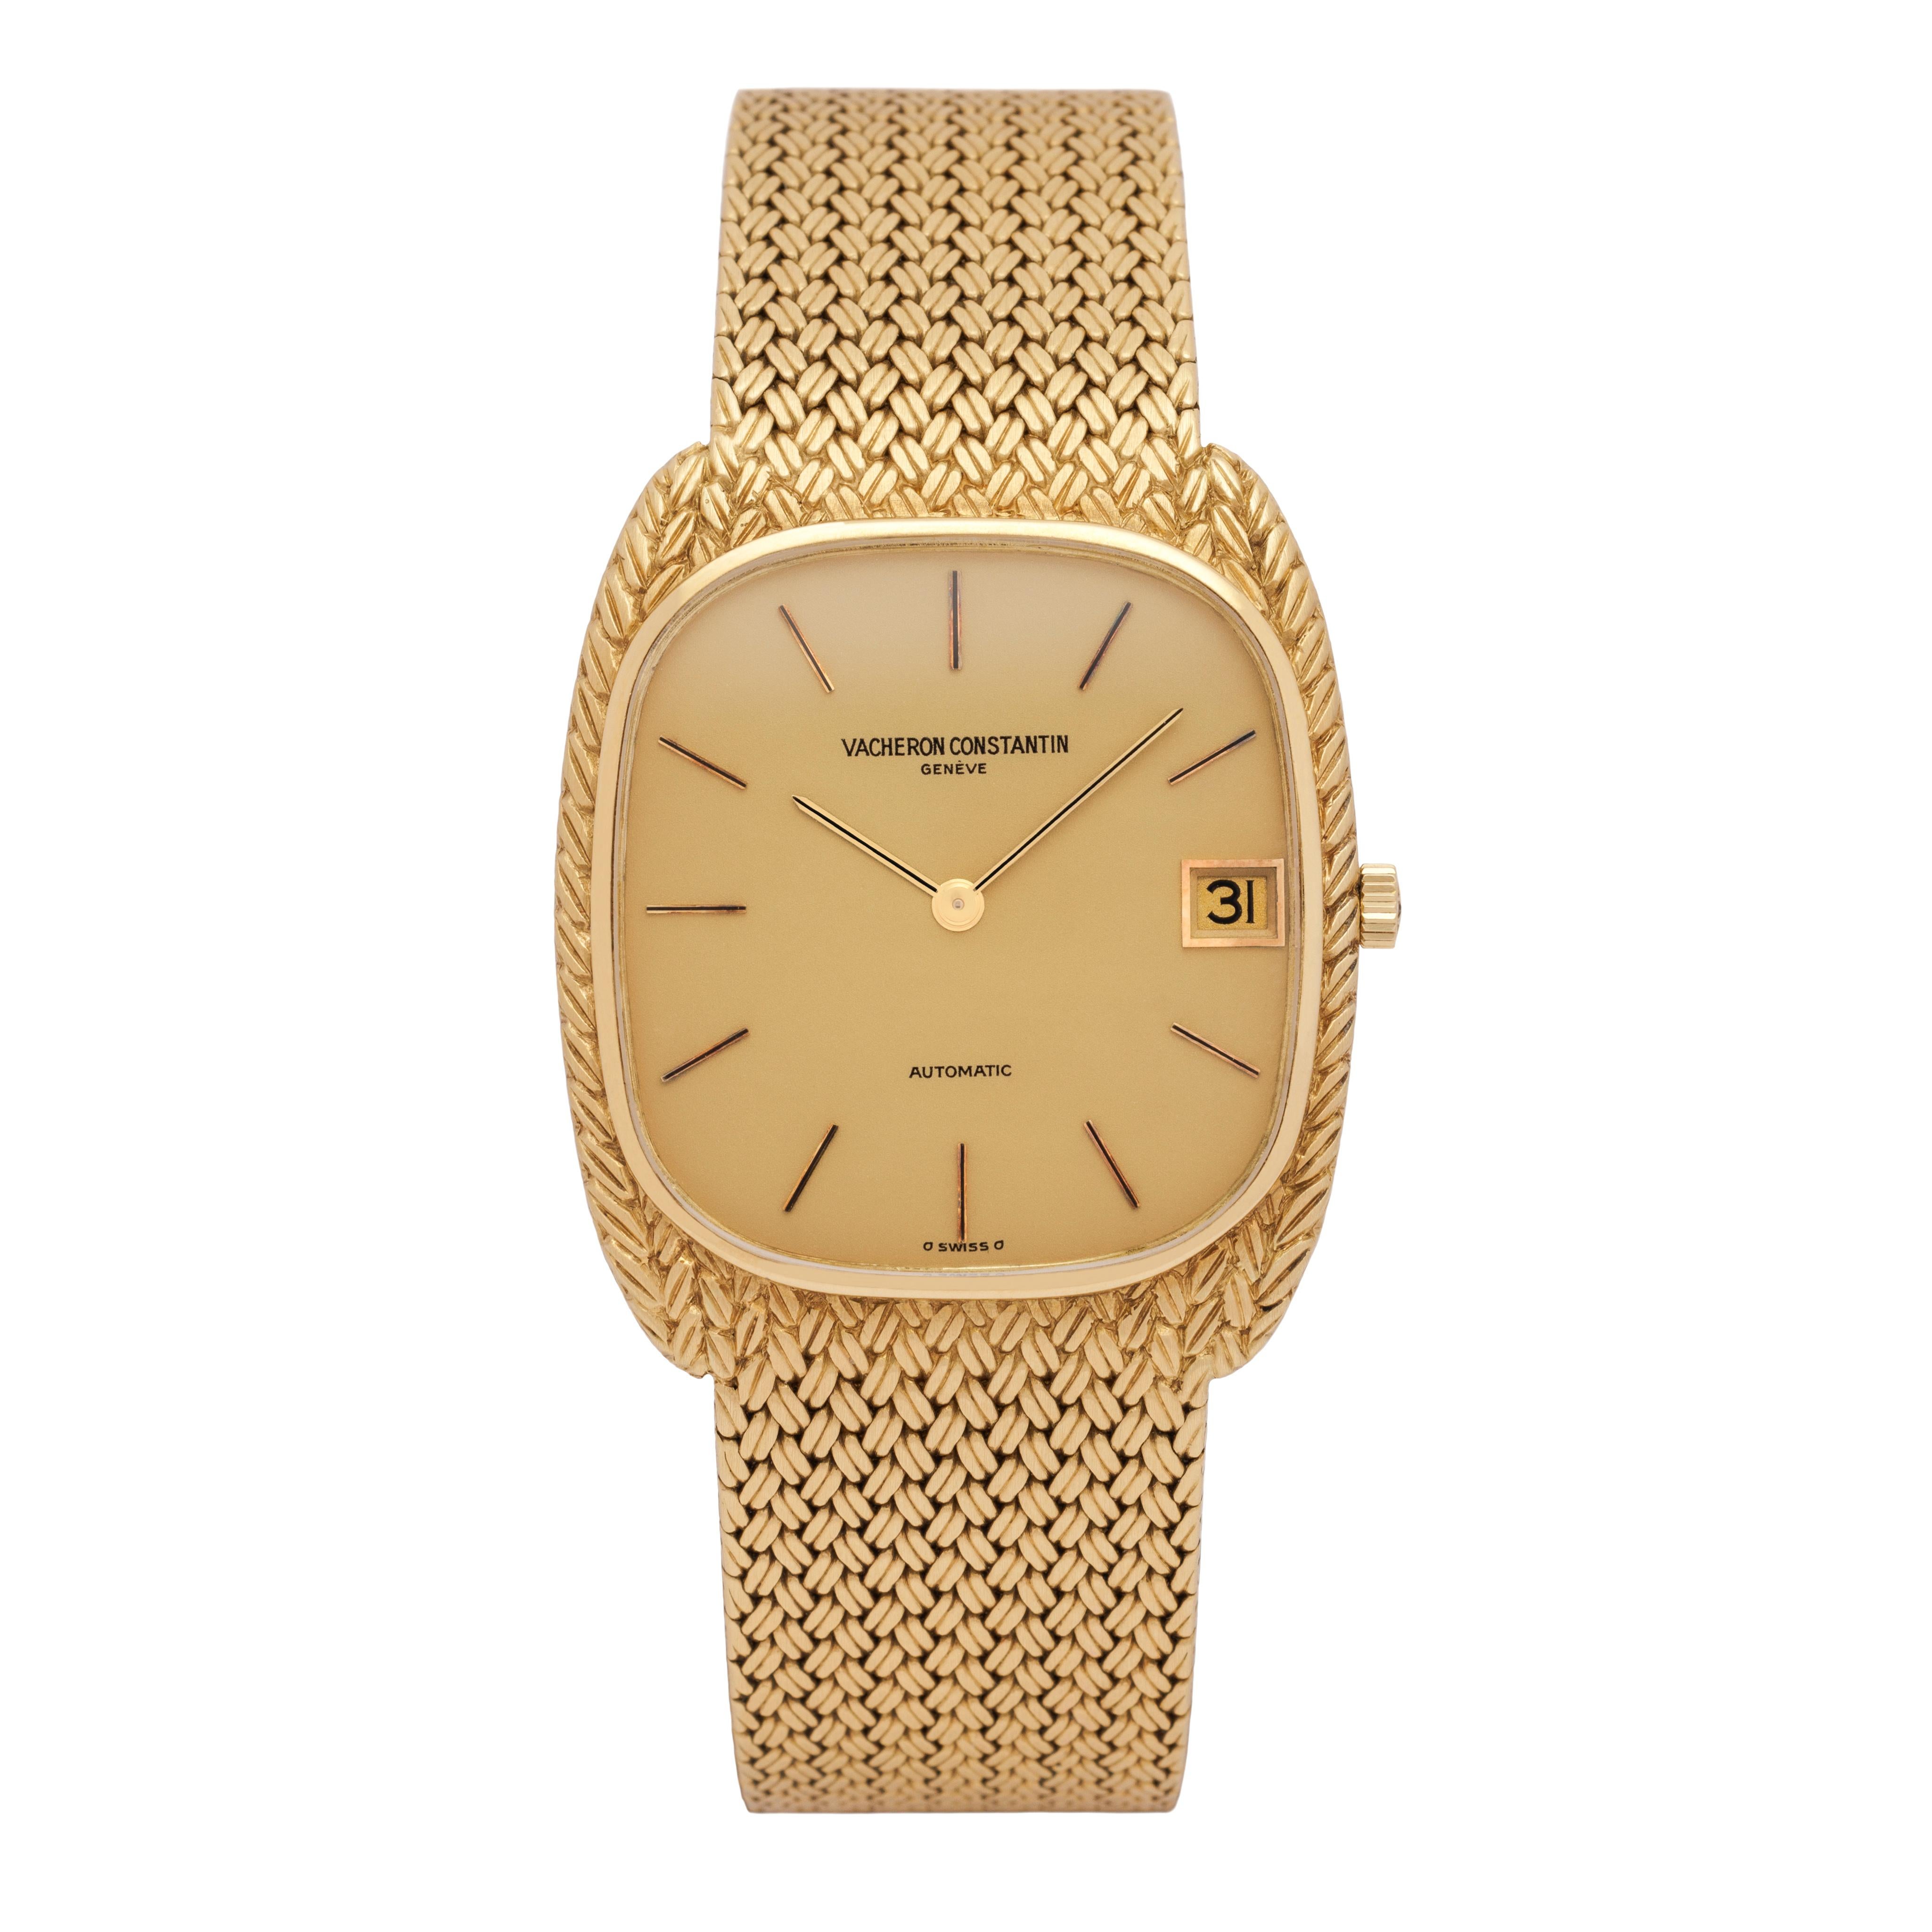 Vacheron Constantin
18 Karat Yellow Gold
Model 2045 Ultra Thin
29mm x 32mm
Automatic Movement
Made in Switzerland
c.1980
Includes original box and papers.
fits up to an 8